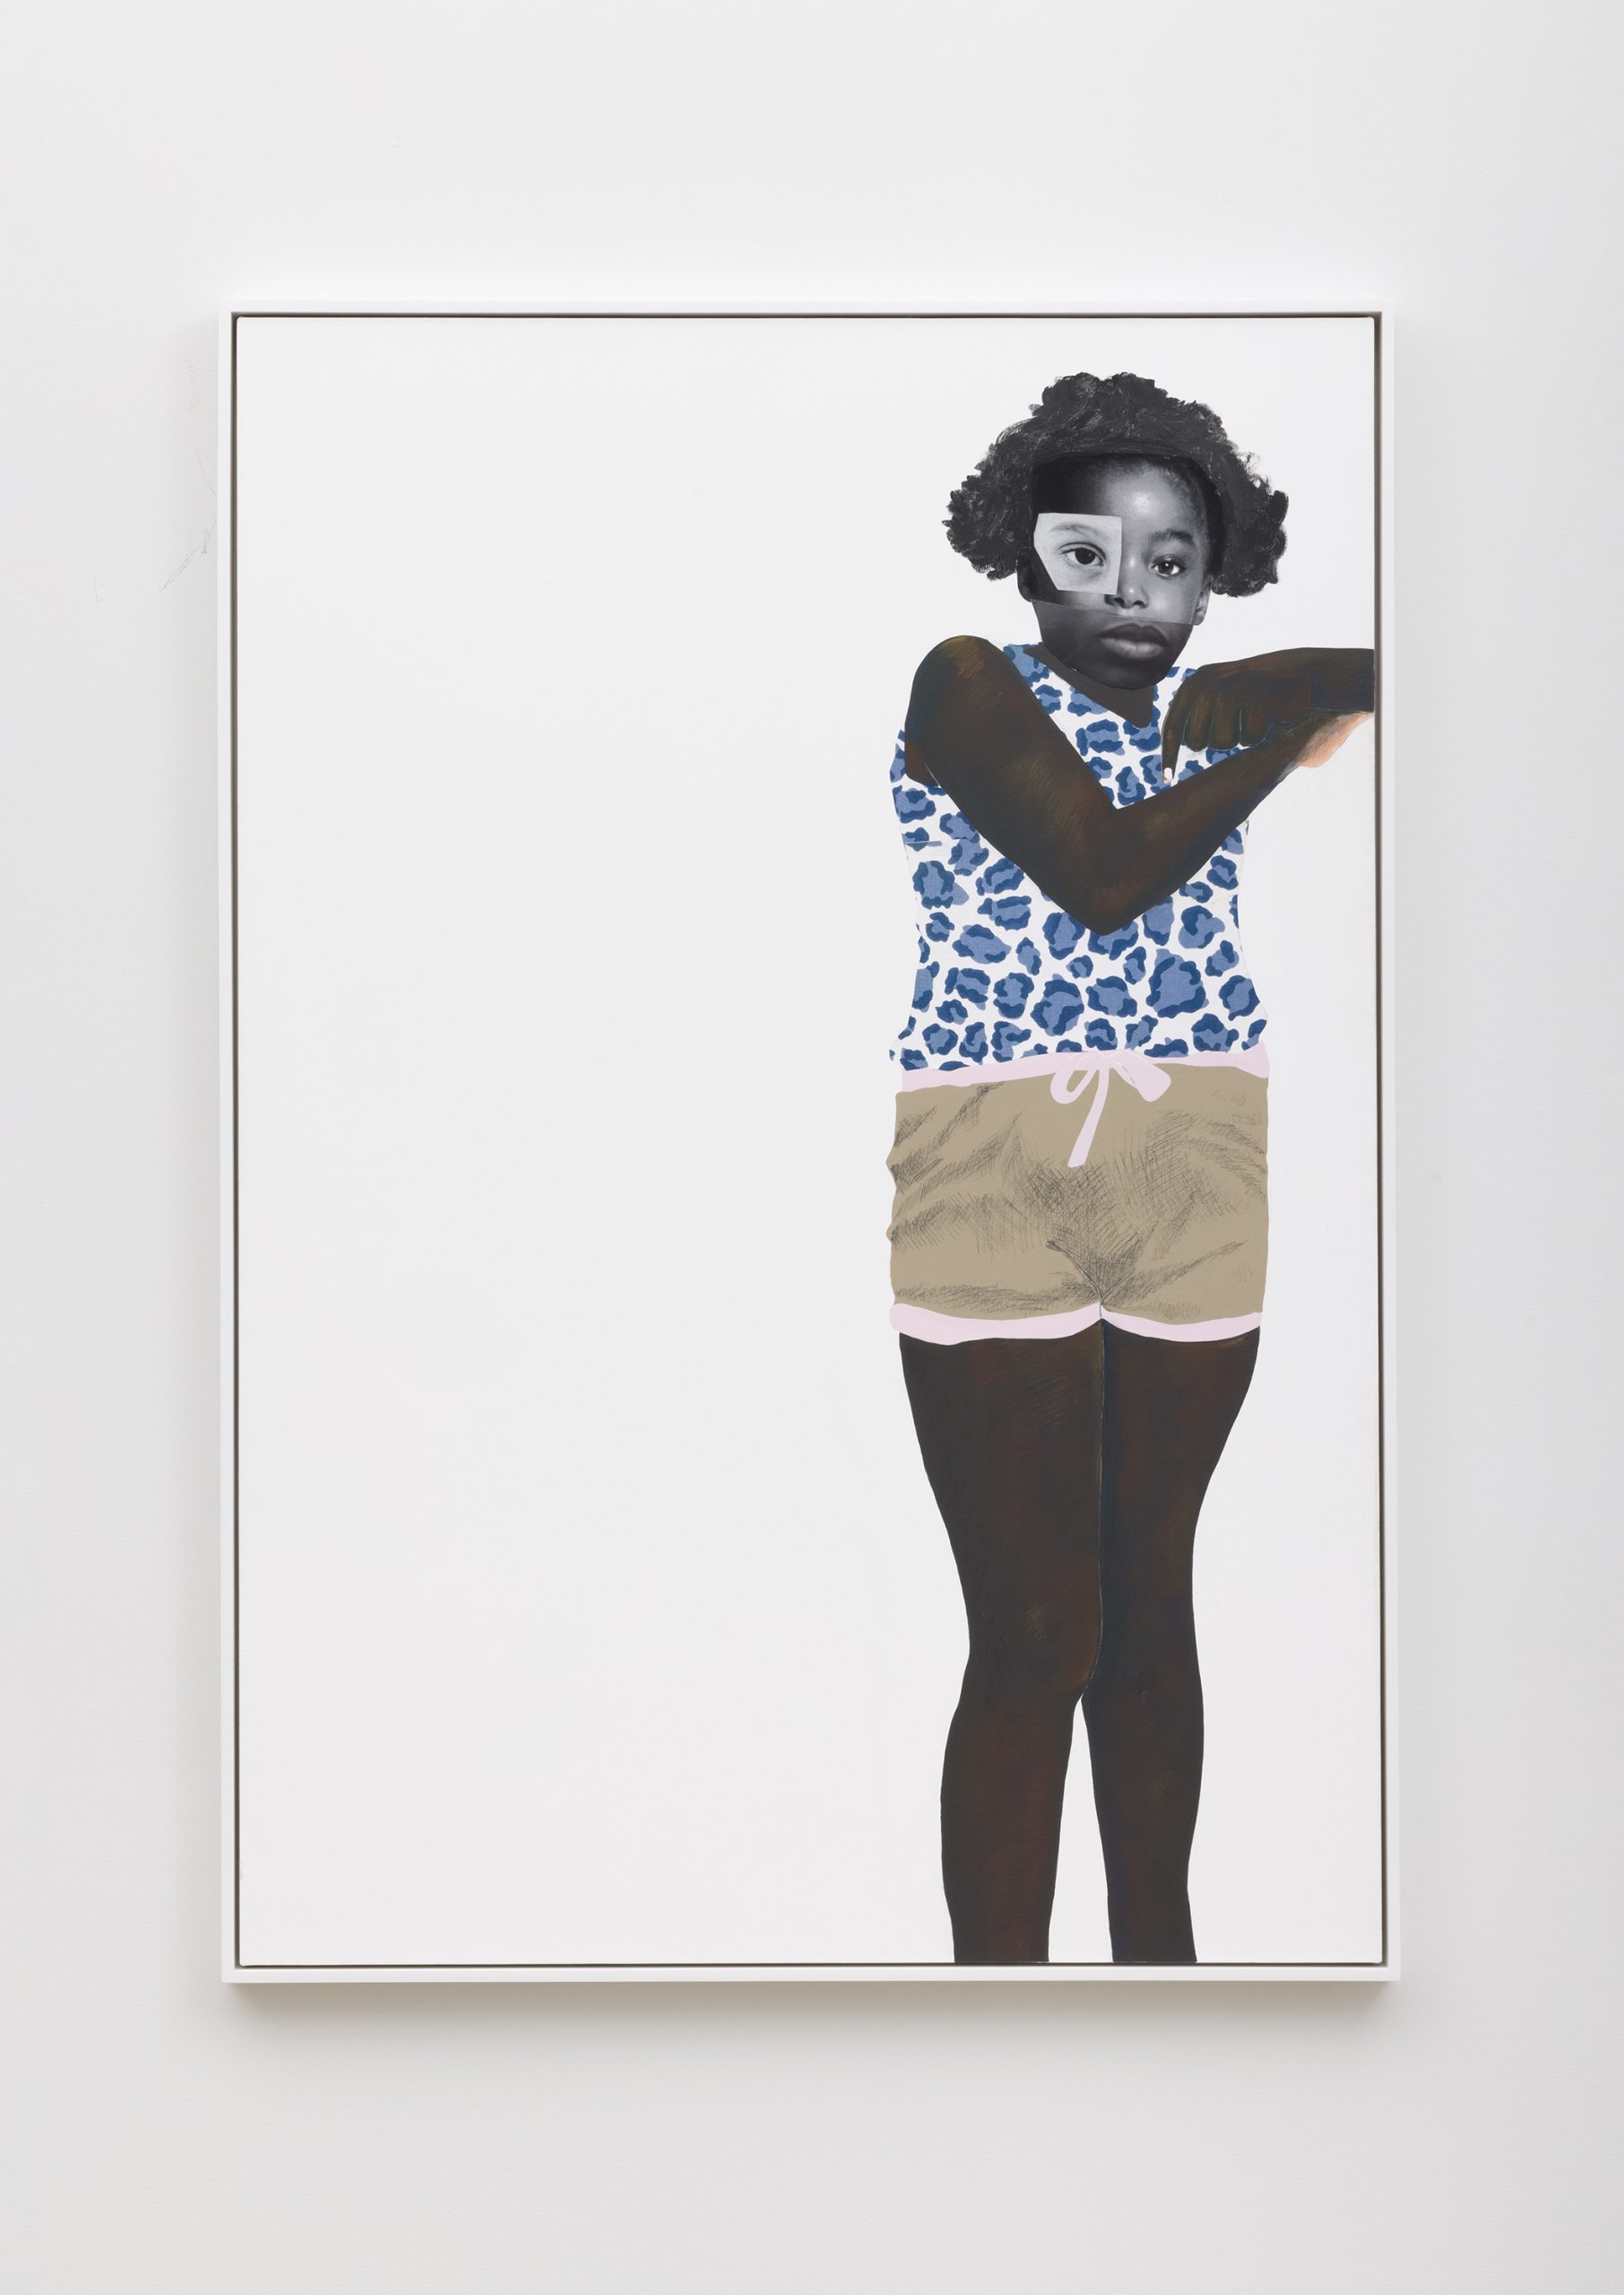 Painting with photocollage elements of a young Black girl standing in casual clothes